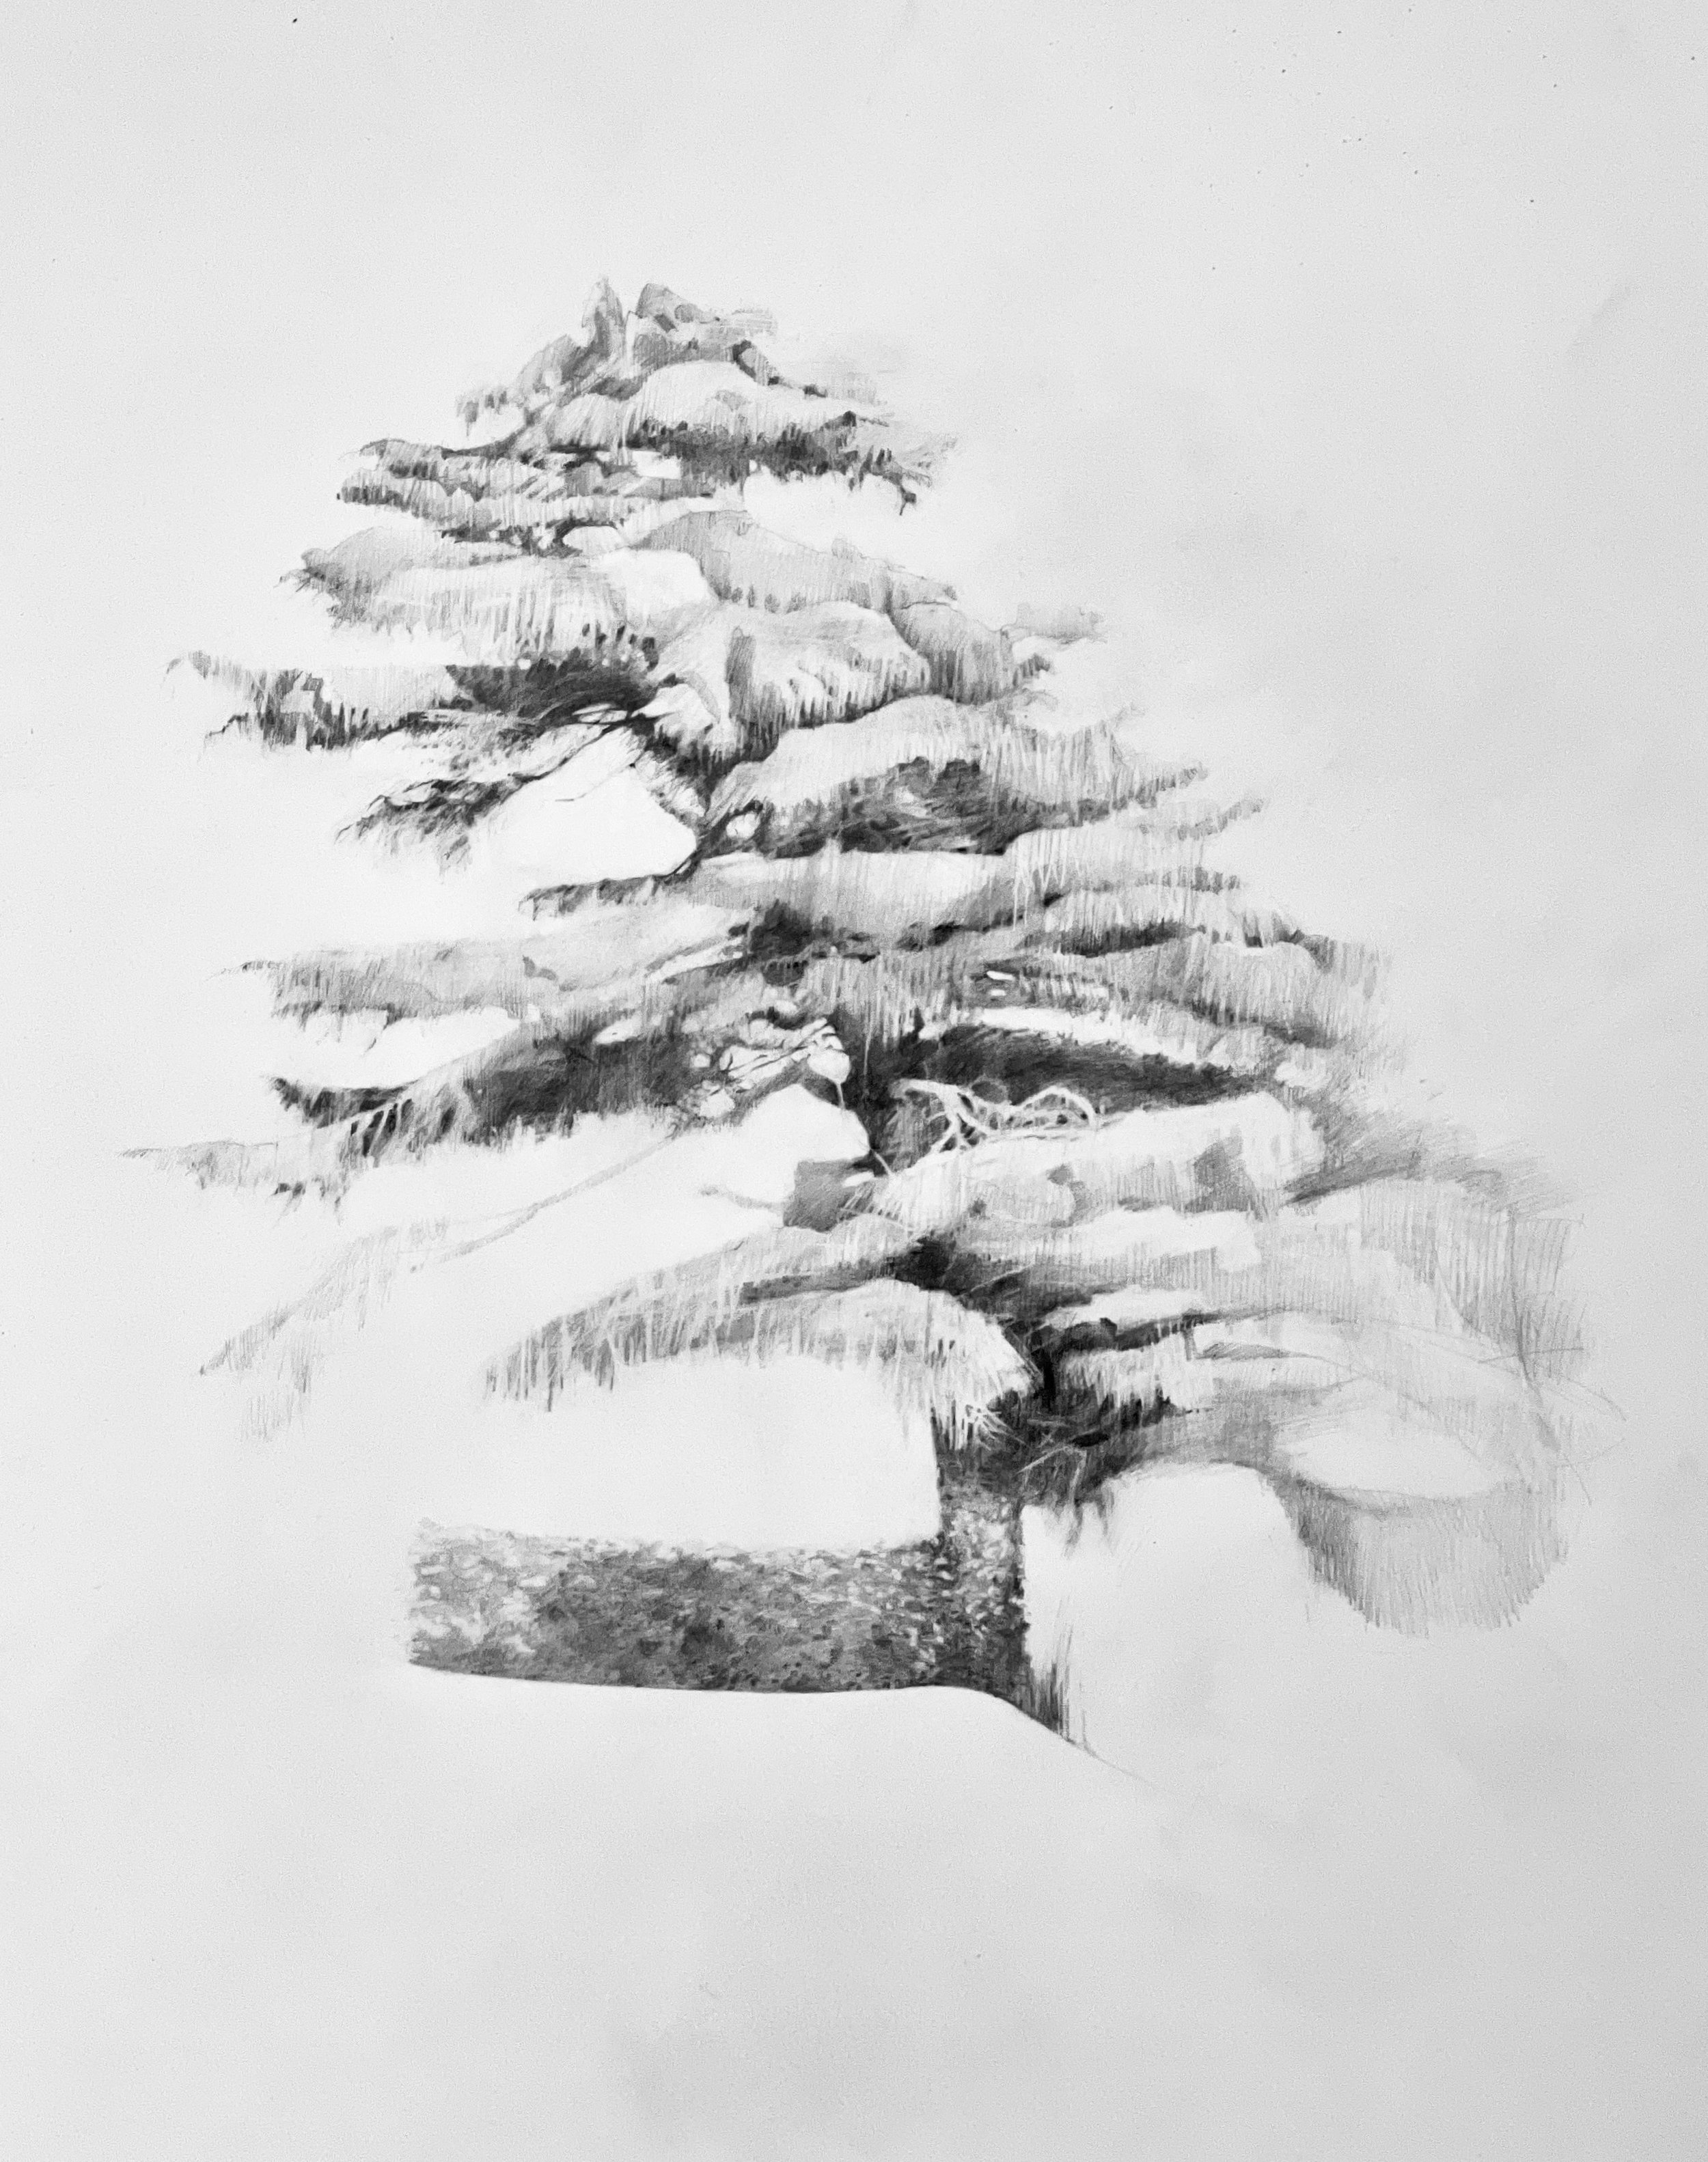   Tree of four seasons   pencil on hot-press Waterford paper 300grms  img: 78 x 58cm frm: 95.5 x 76.5cm    SOLD 